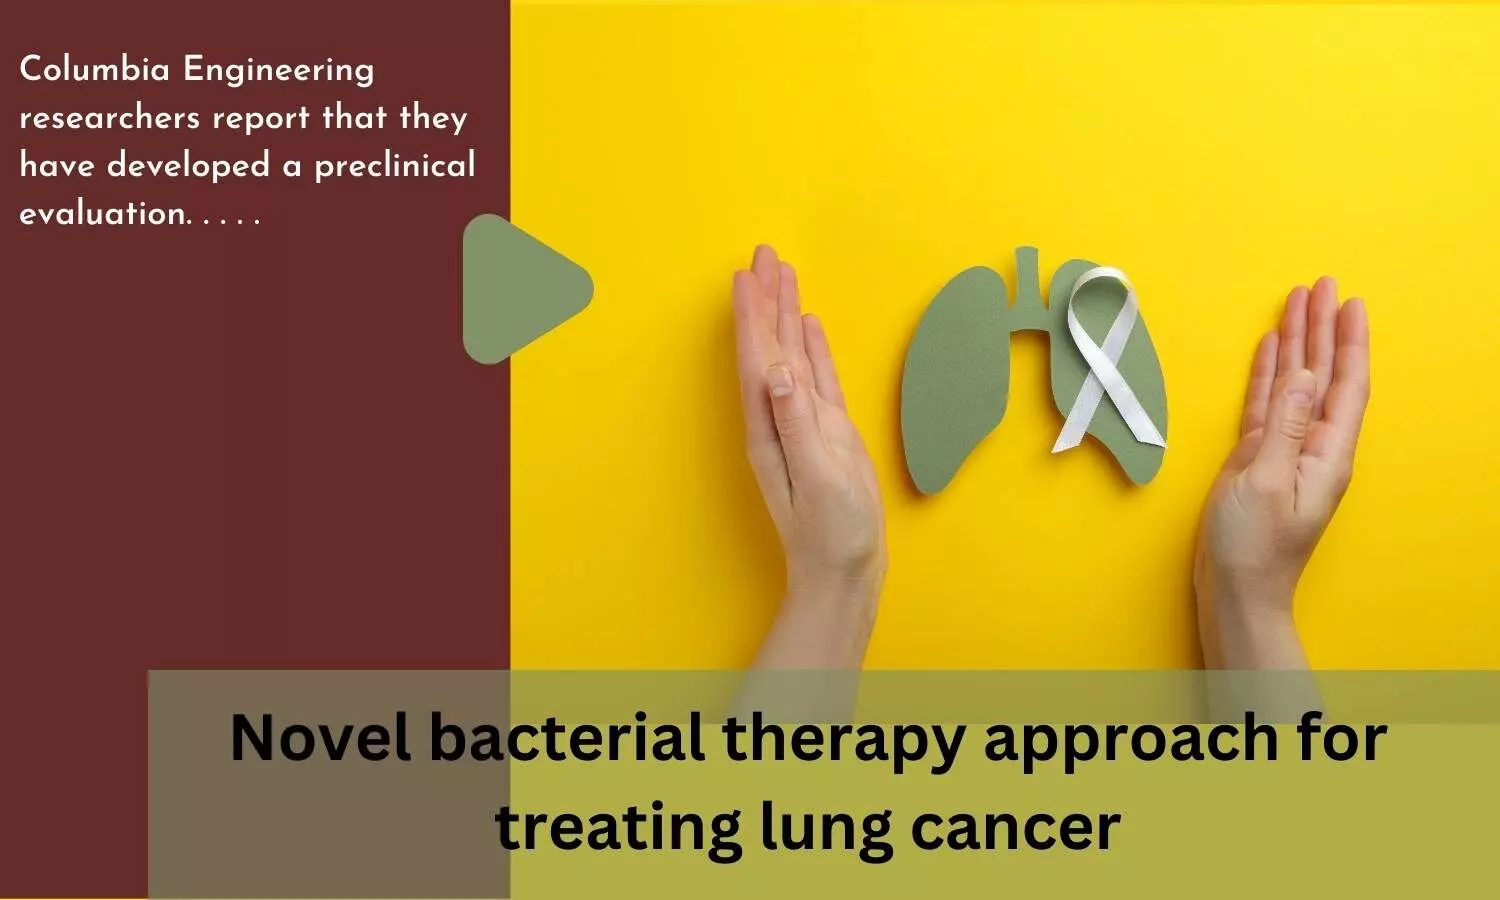 Novel bacterial therapy approach for treating lung cancer